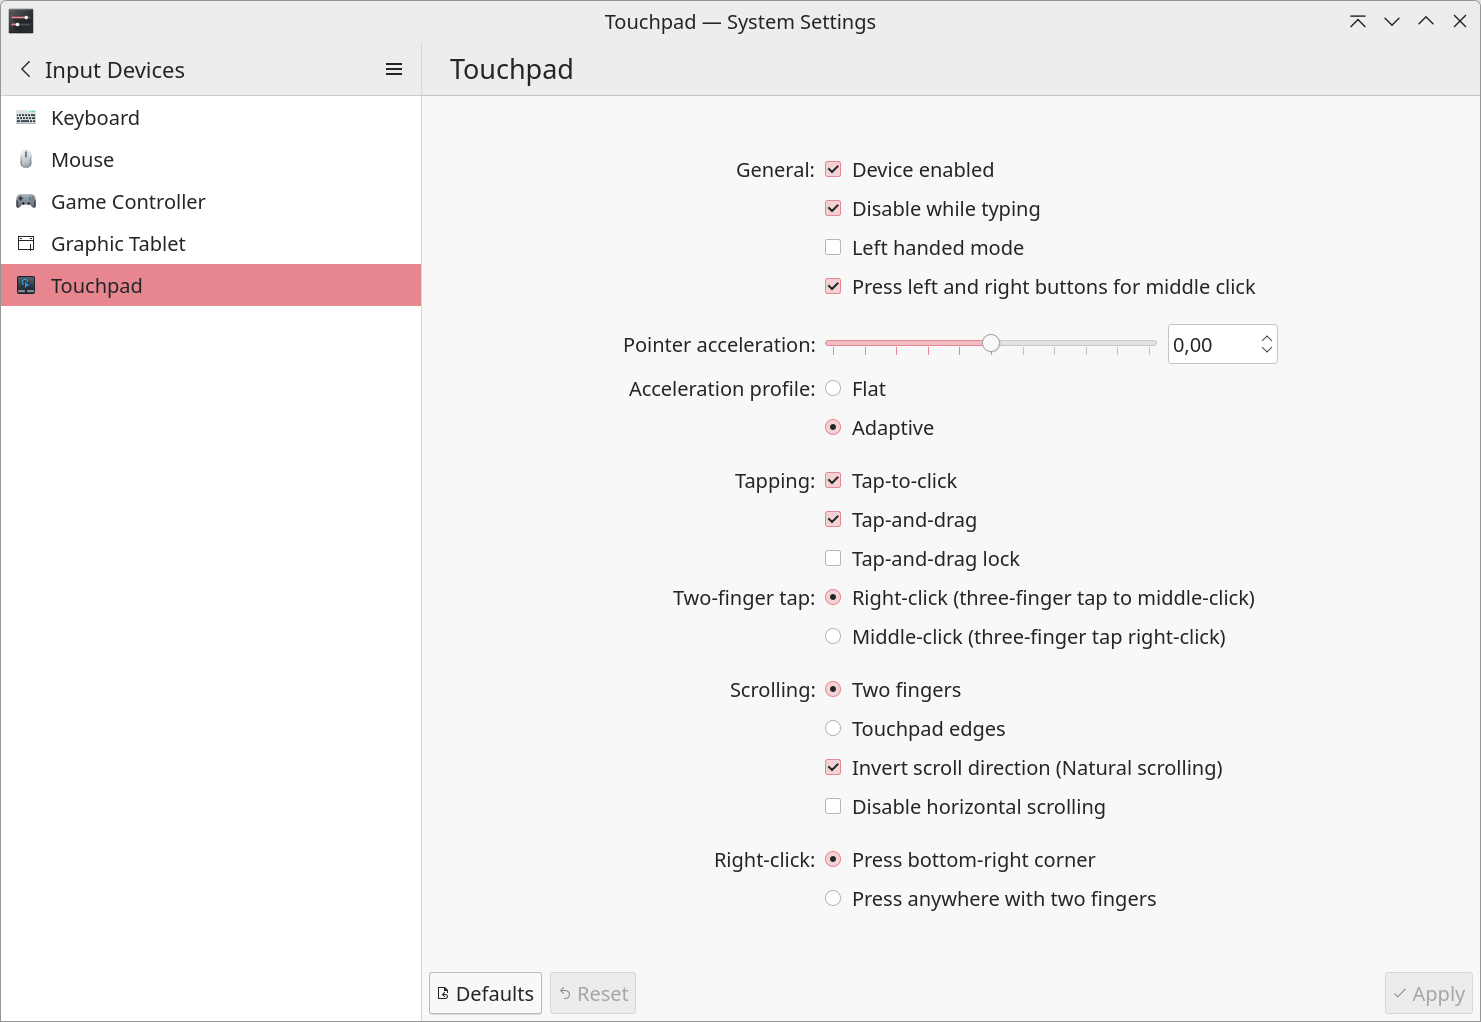 TUXEDO OS offers a number of settings to control the touchpad. If necessary, completely disable the touchpad for your user.